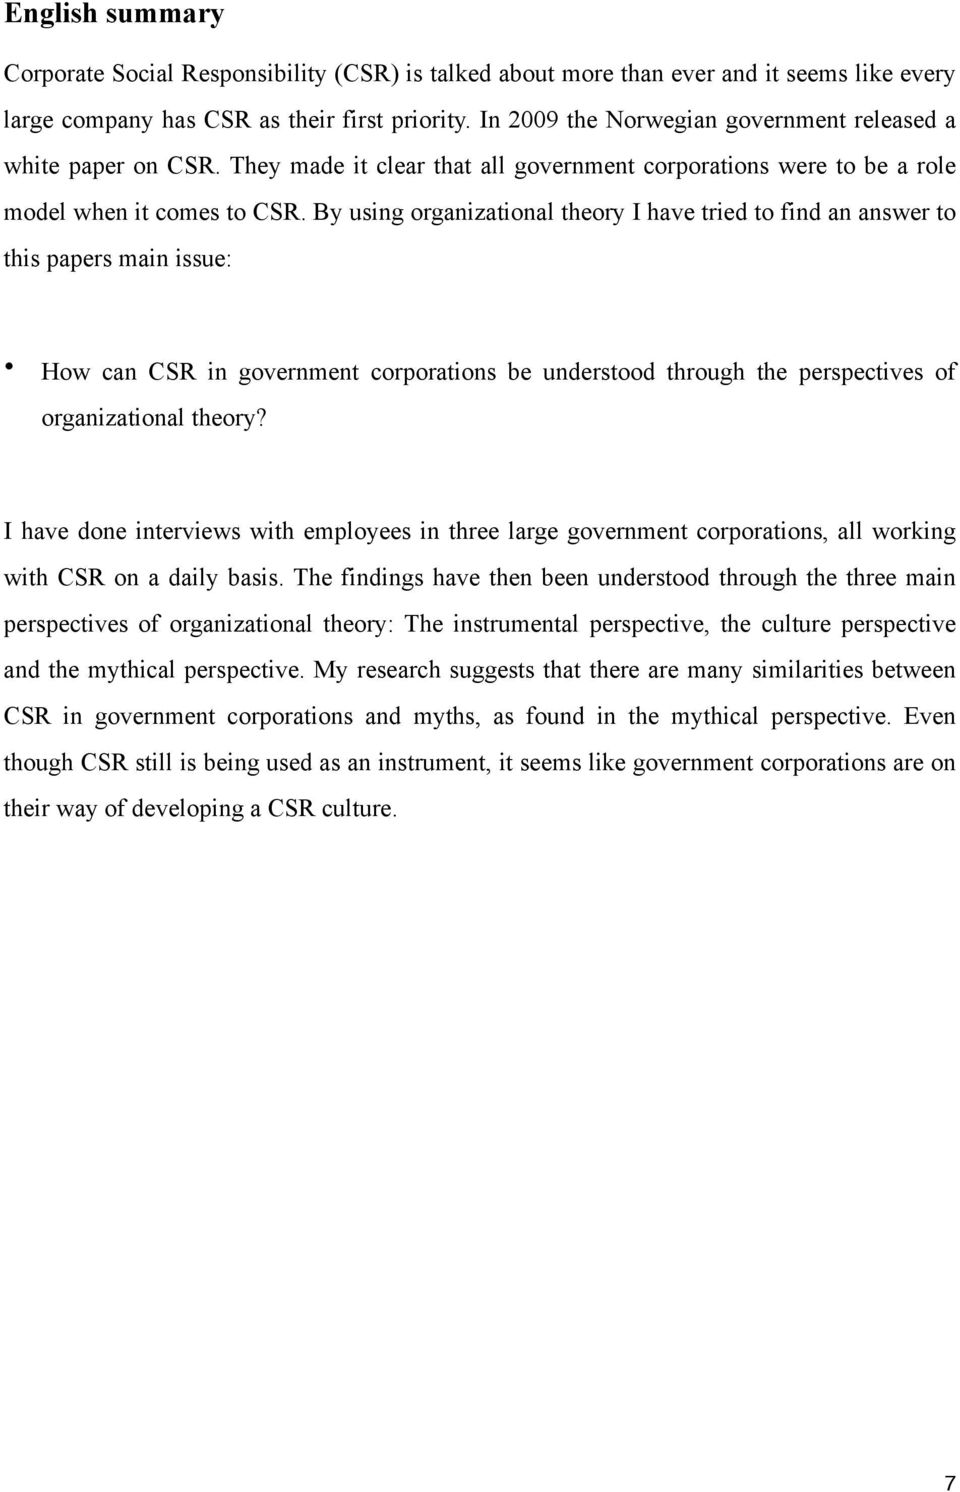 By using organizational theory I have tried to find an answer to this papers main issue: How can CSR in government corporations be understood through the perspectives of organizational theory?